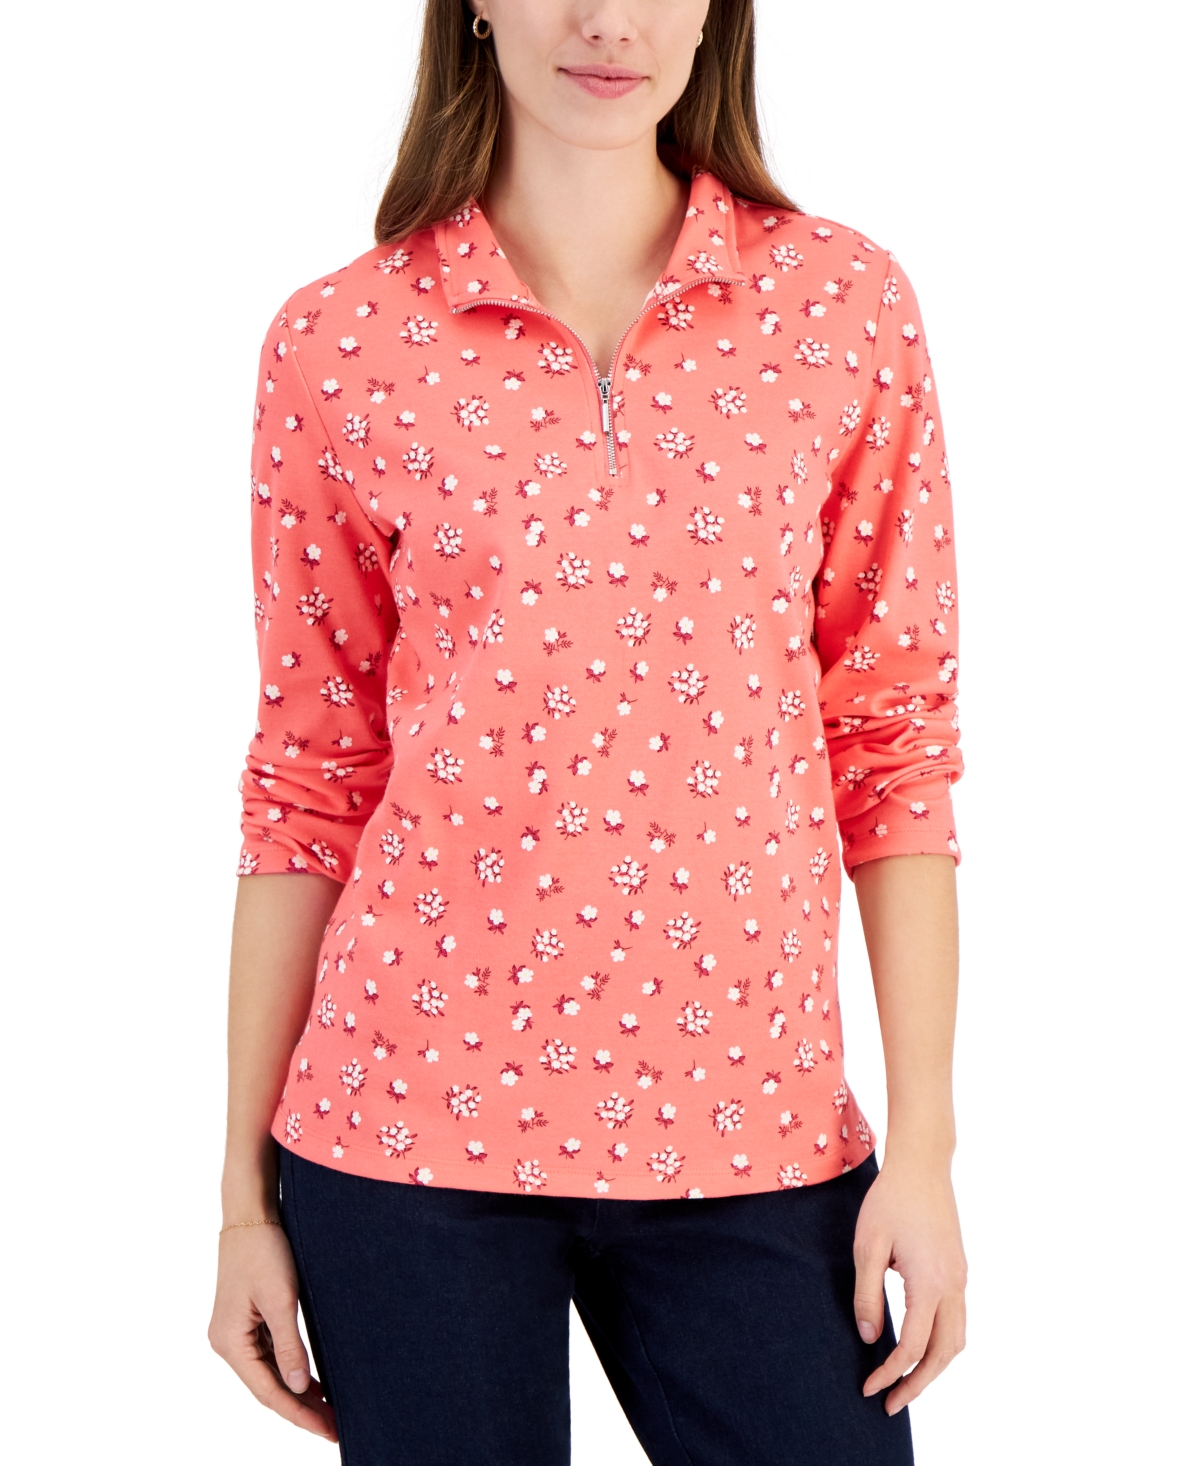 Women's Diana Daisy Printed Quarter-Zip Top, Created for Macy's - Peony Coral